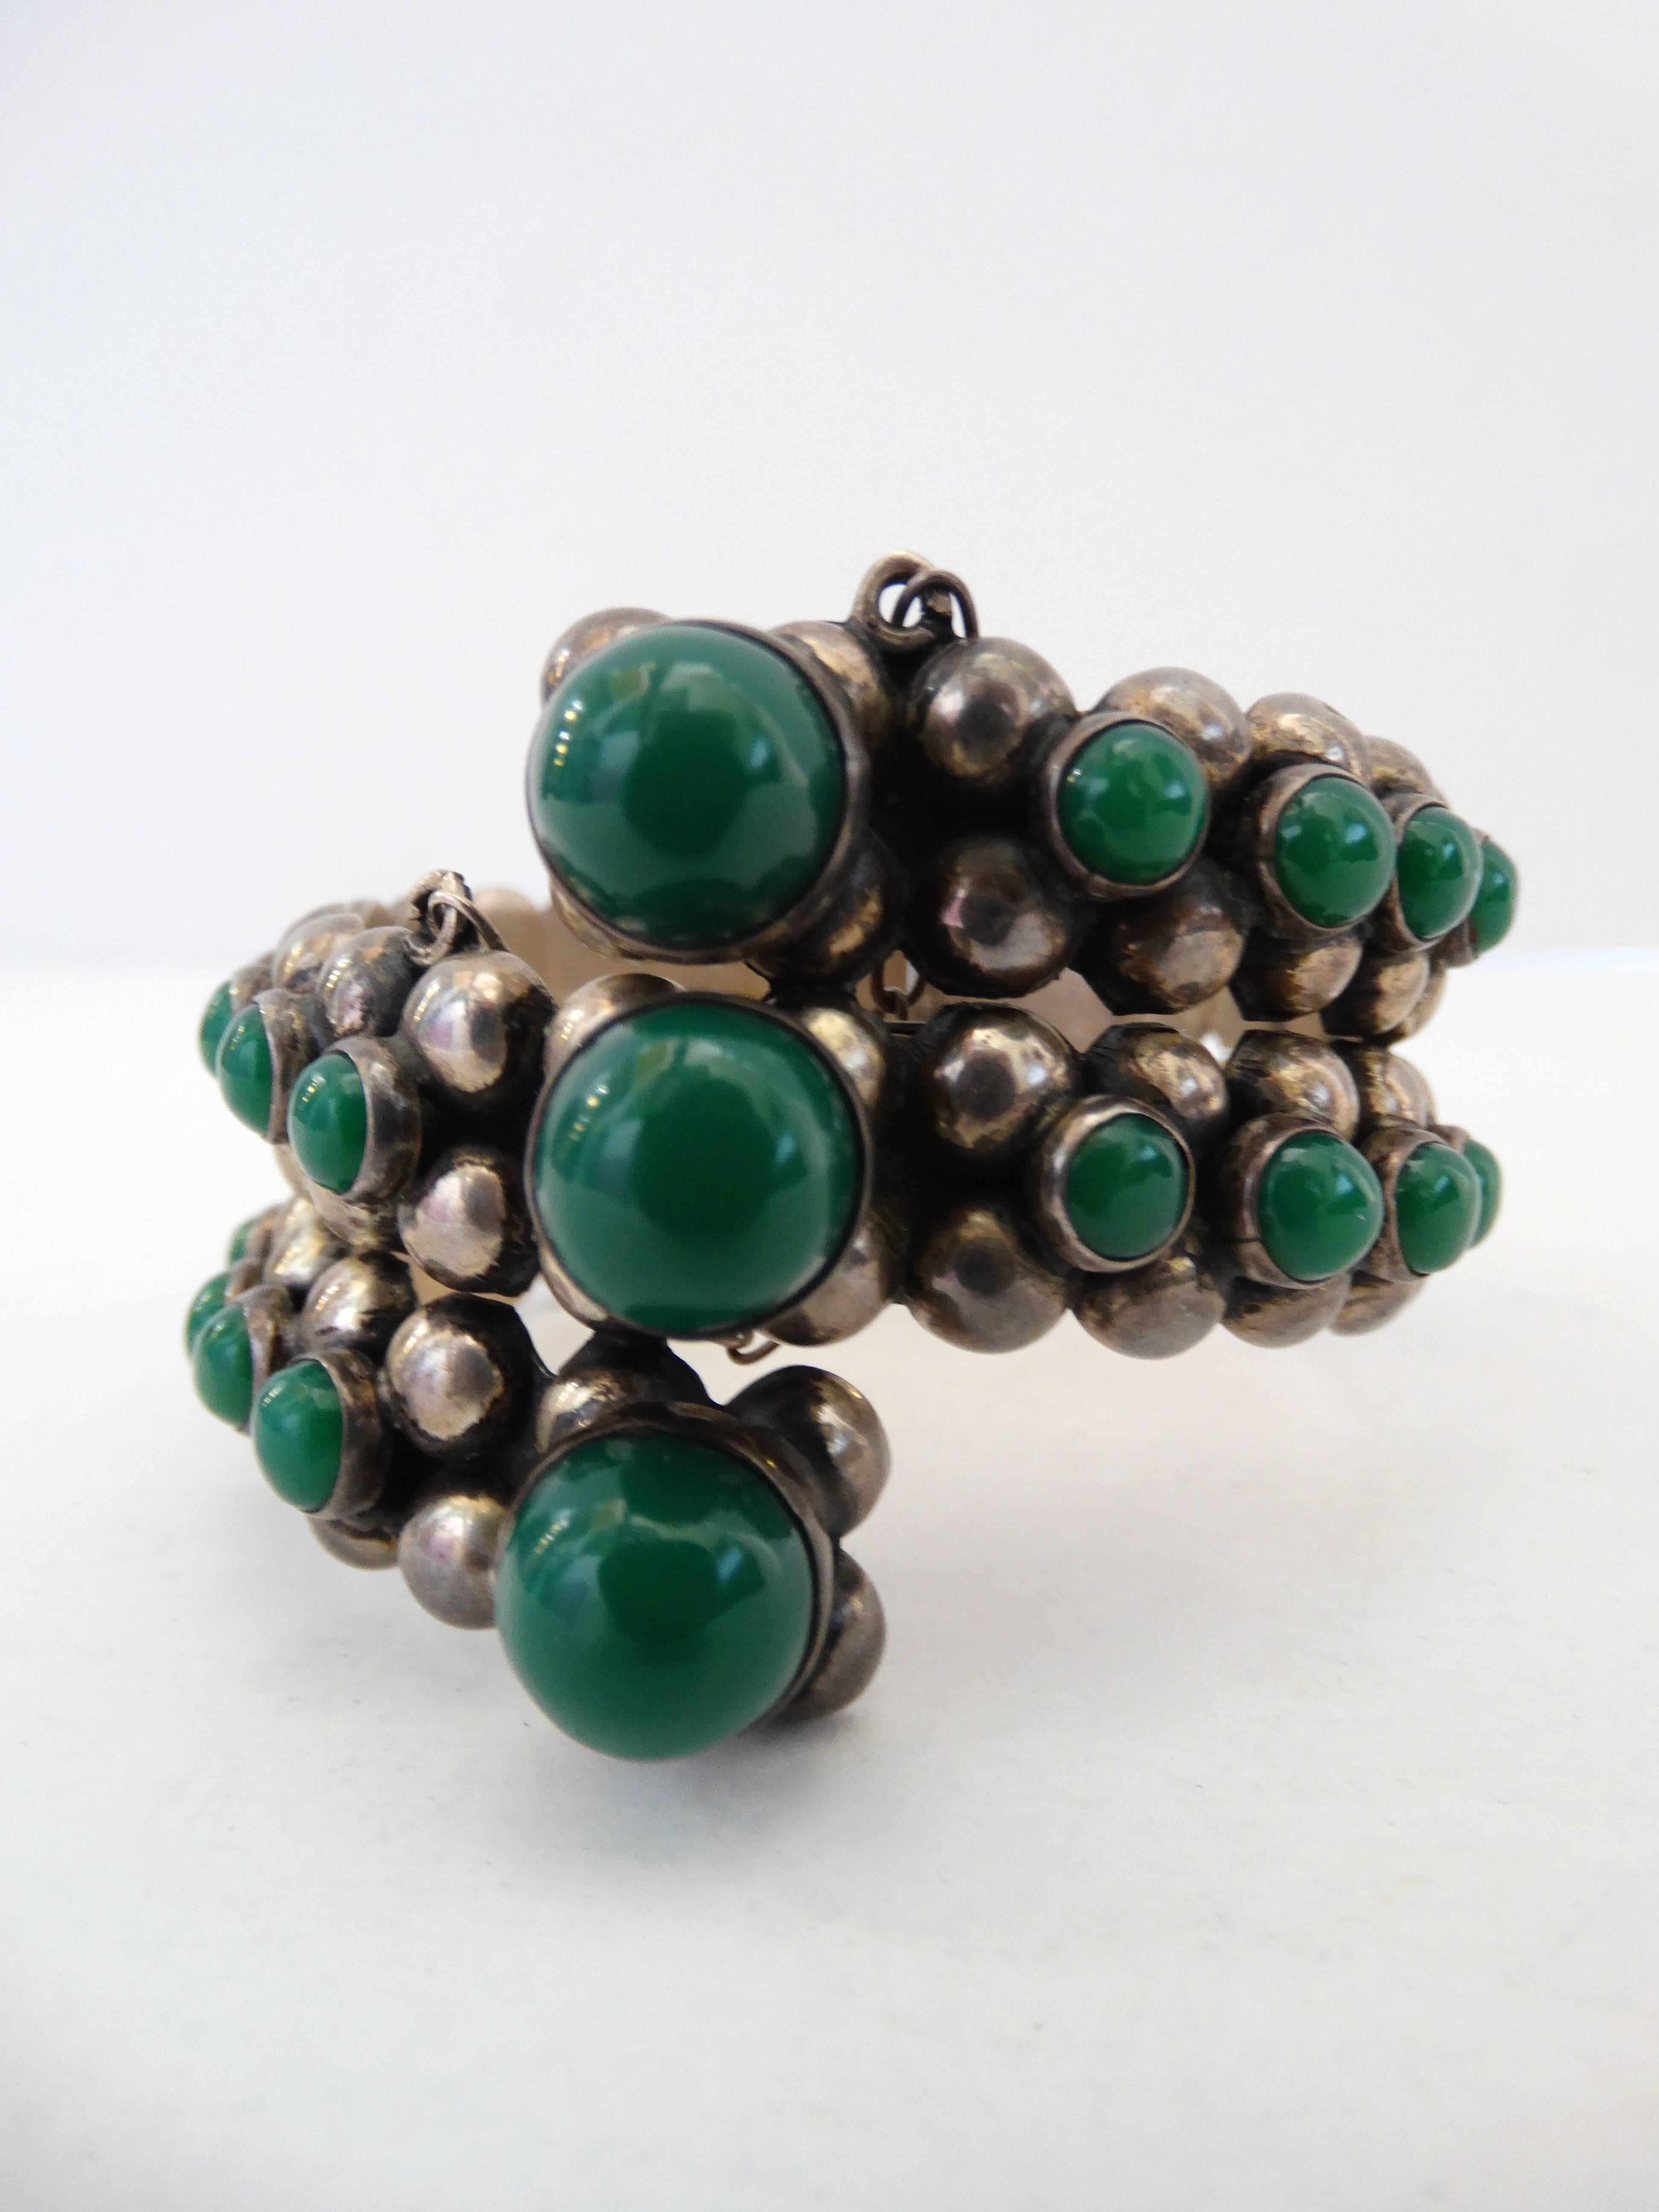 Incredible mid century silver cuff from Gonzalo Moreno! Solid sterling silver metal in a bead like pattern, accented with rows of polished green jade orbs. Hinge closure clicks open, has a silver chain to hold it in place. Signed at the back with